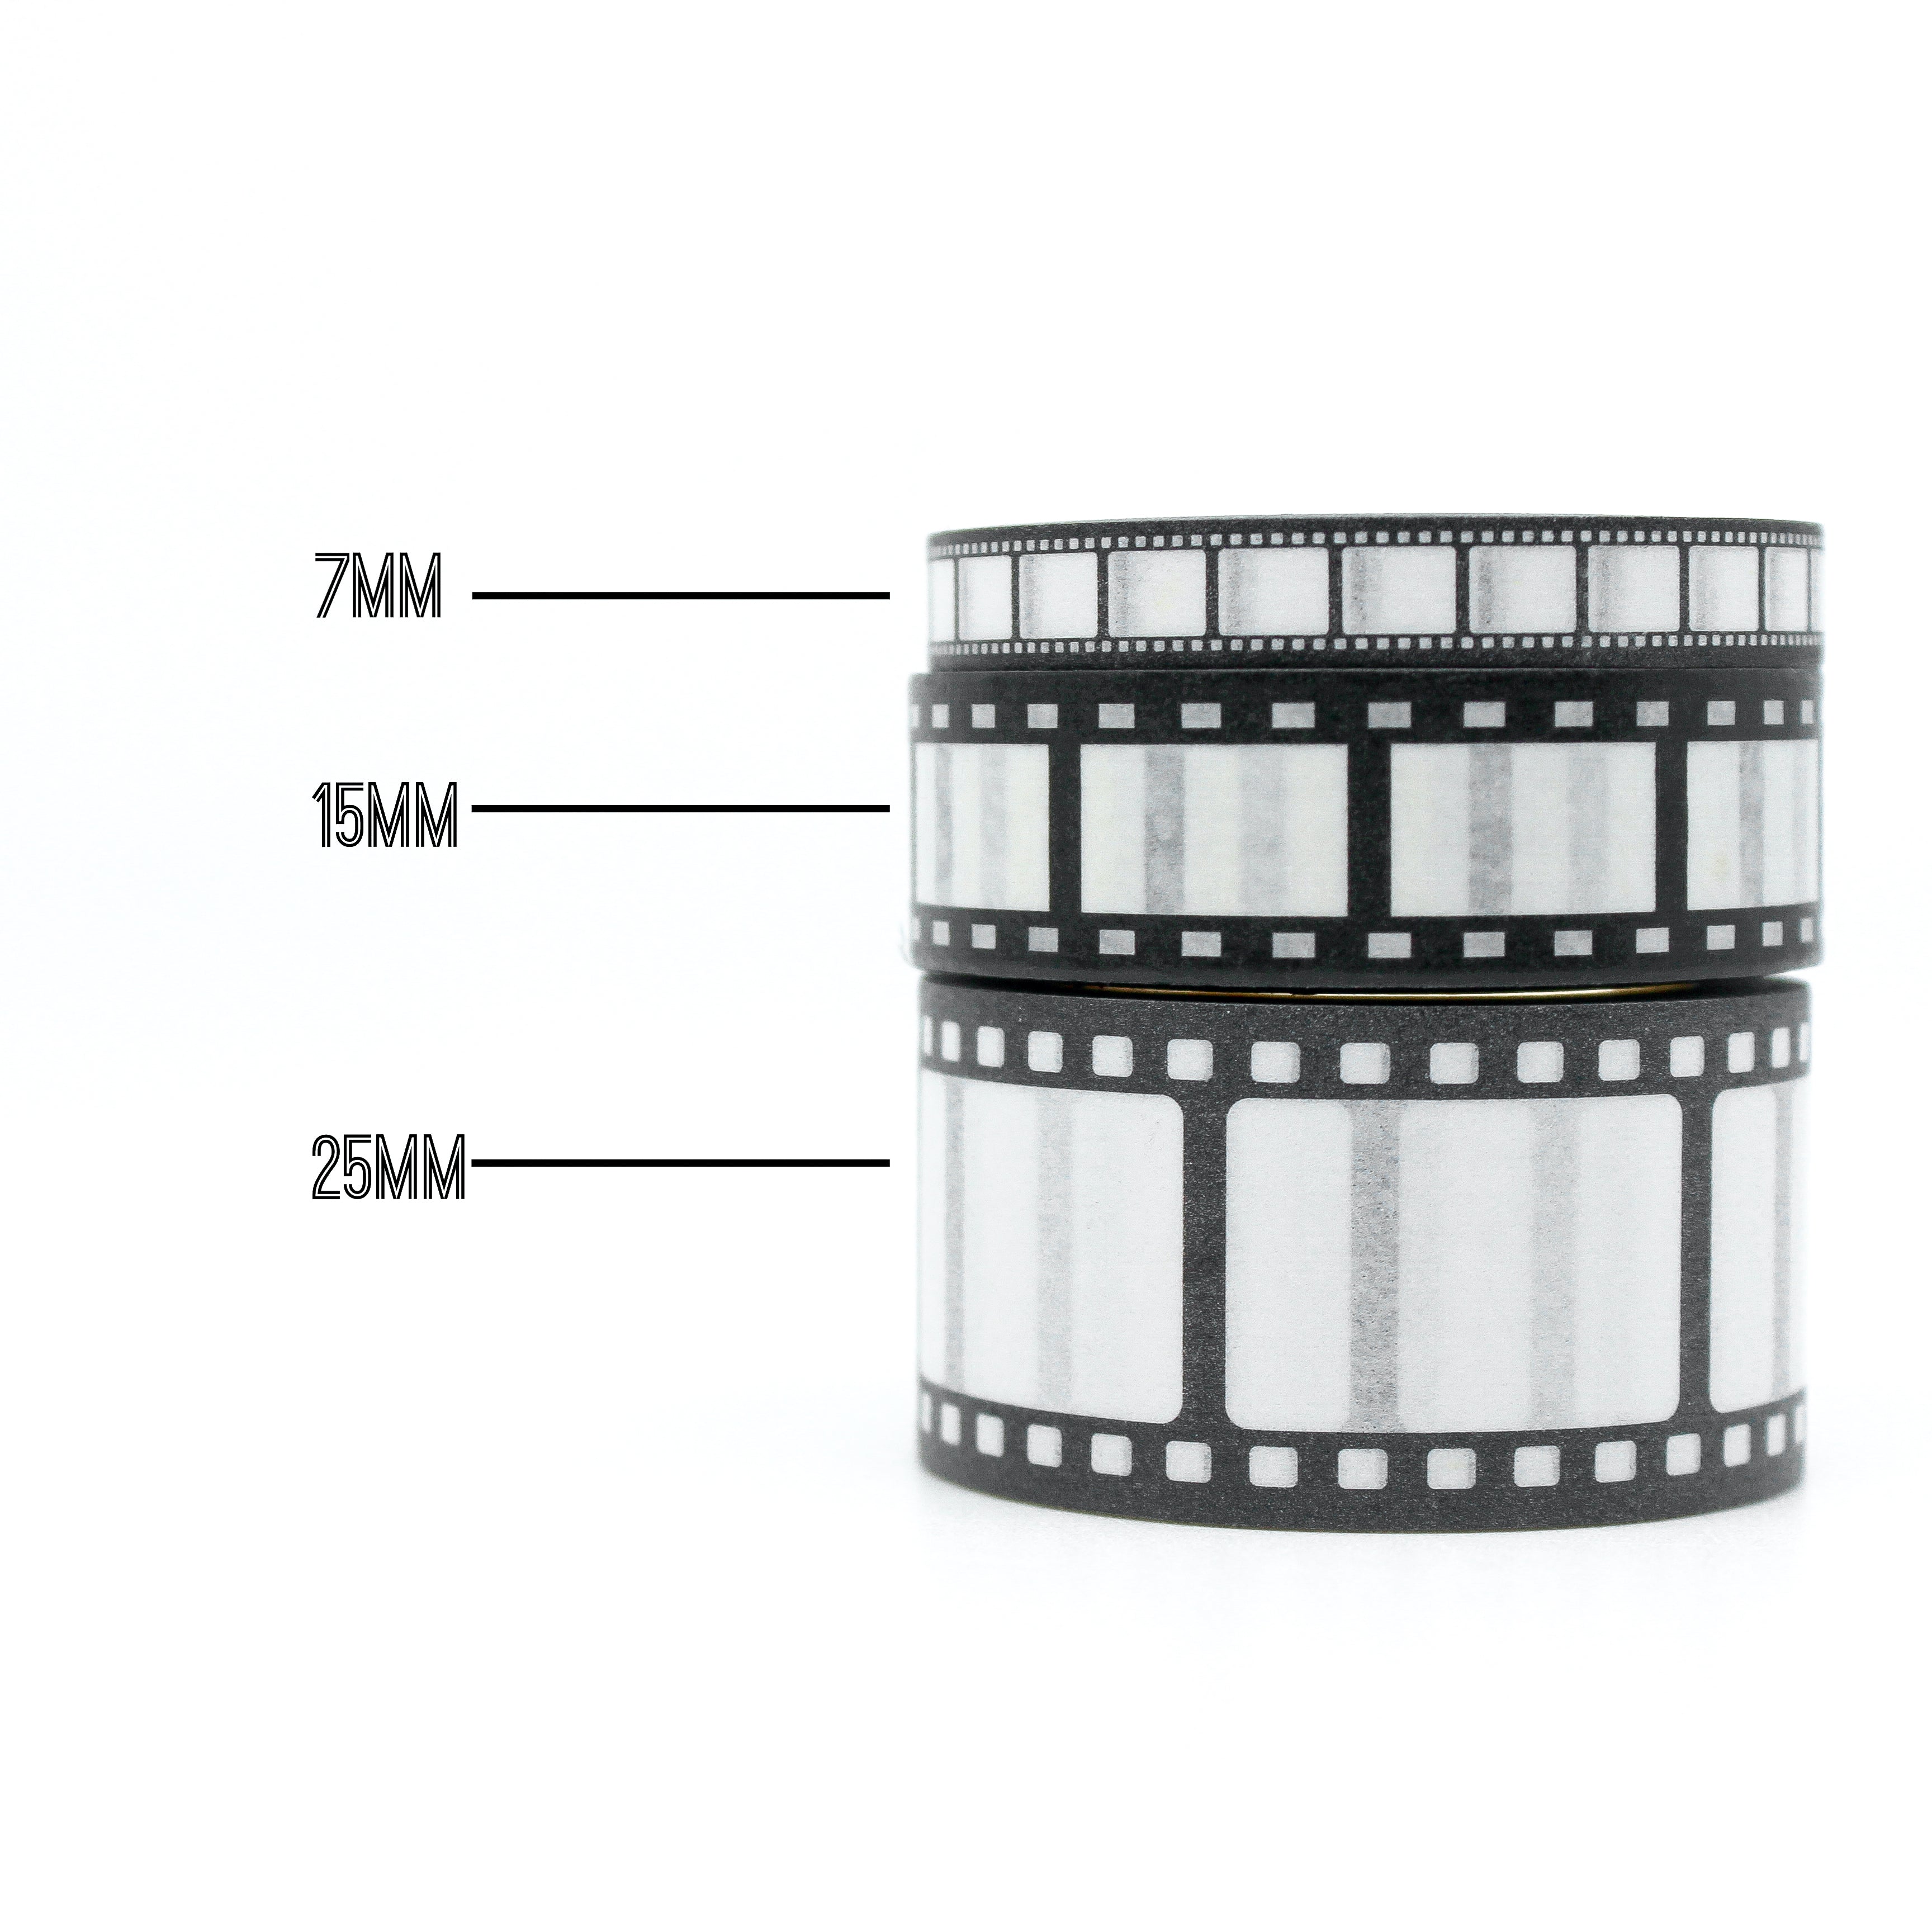 Multiple Sizes available of the Movie Style Film Strip Washi tape for Calendar, Journaling, planners, and craft projects from BBB Supplies Craft Shop. choices of 7mm, 15mm, or 25mm